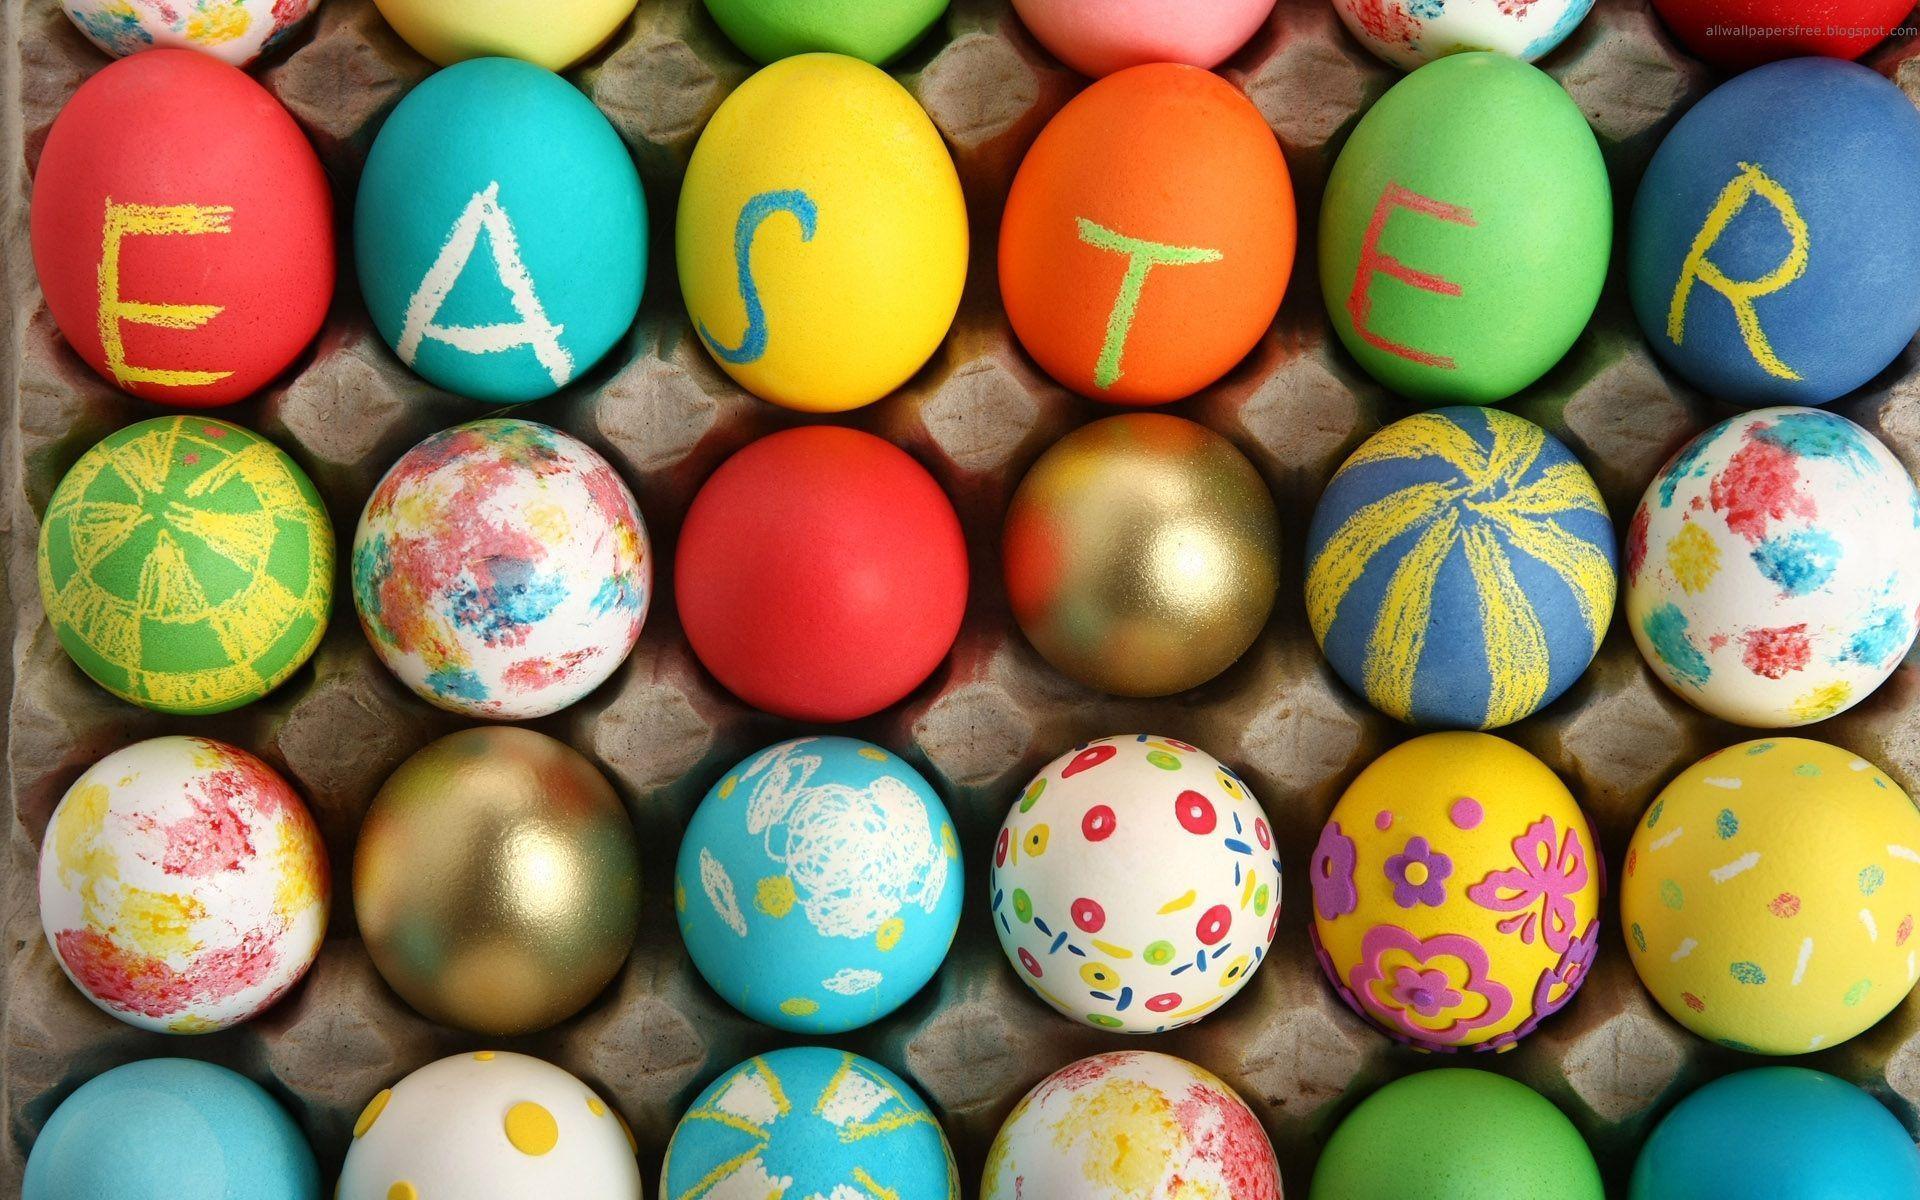 Free Download Backgrounds For Desktop And Easter Egg Grass Hd